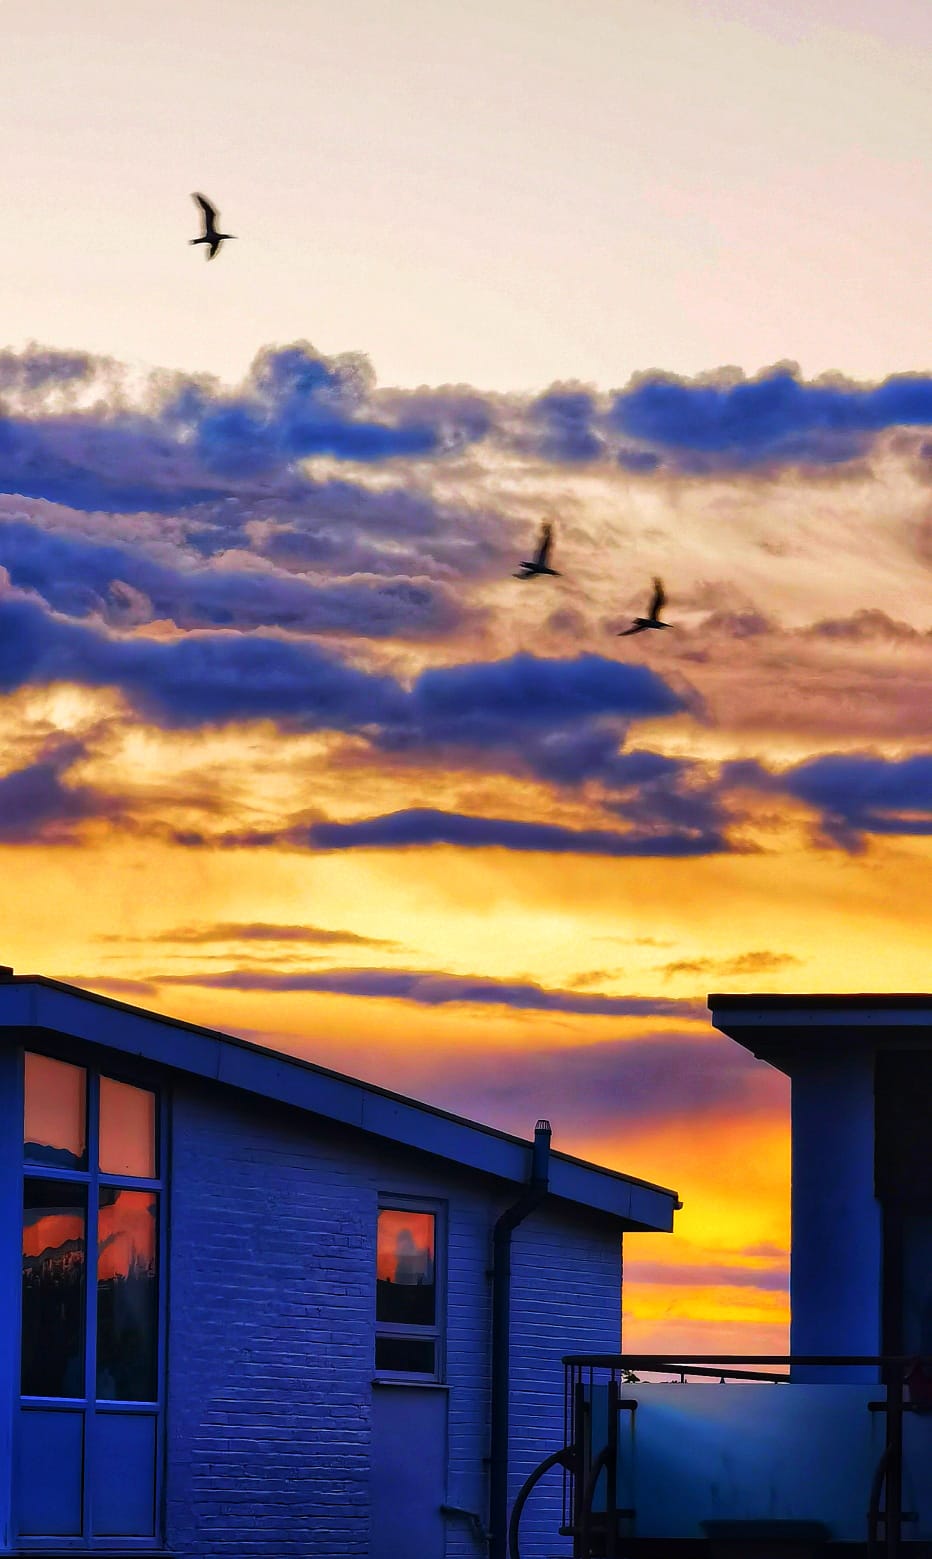 Sunset over buildings with birds silhouetted